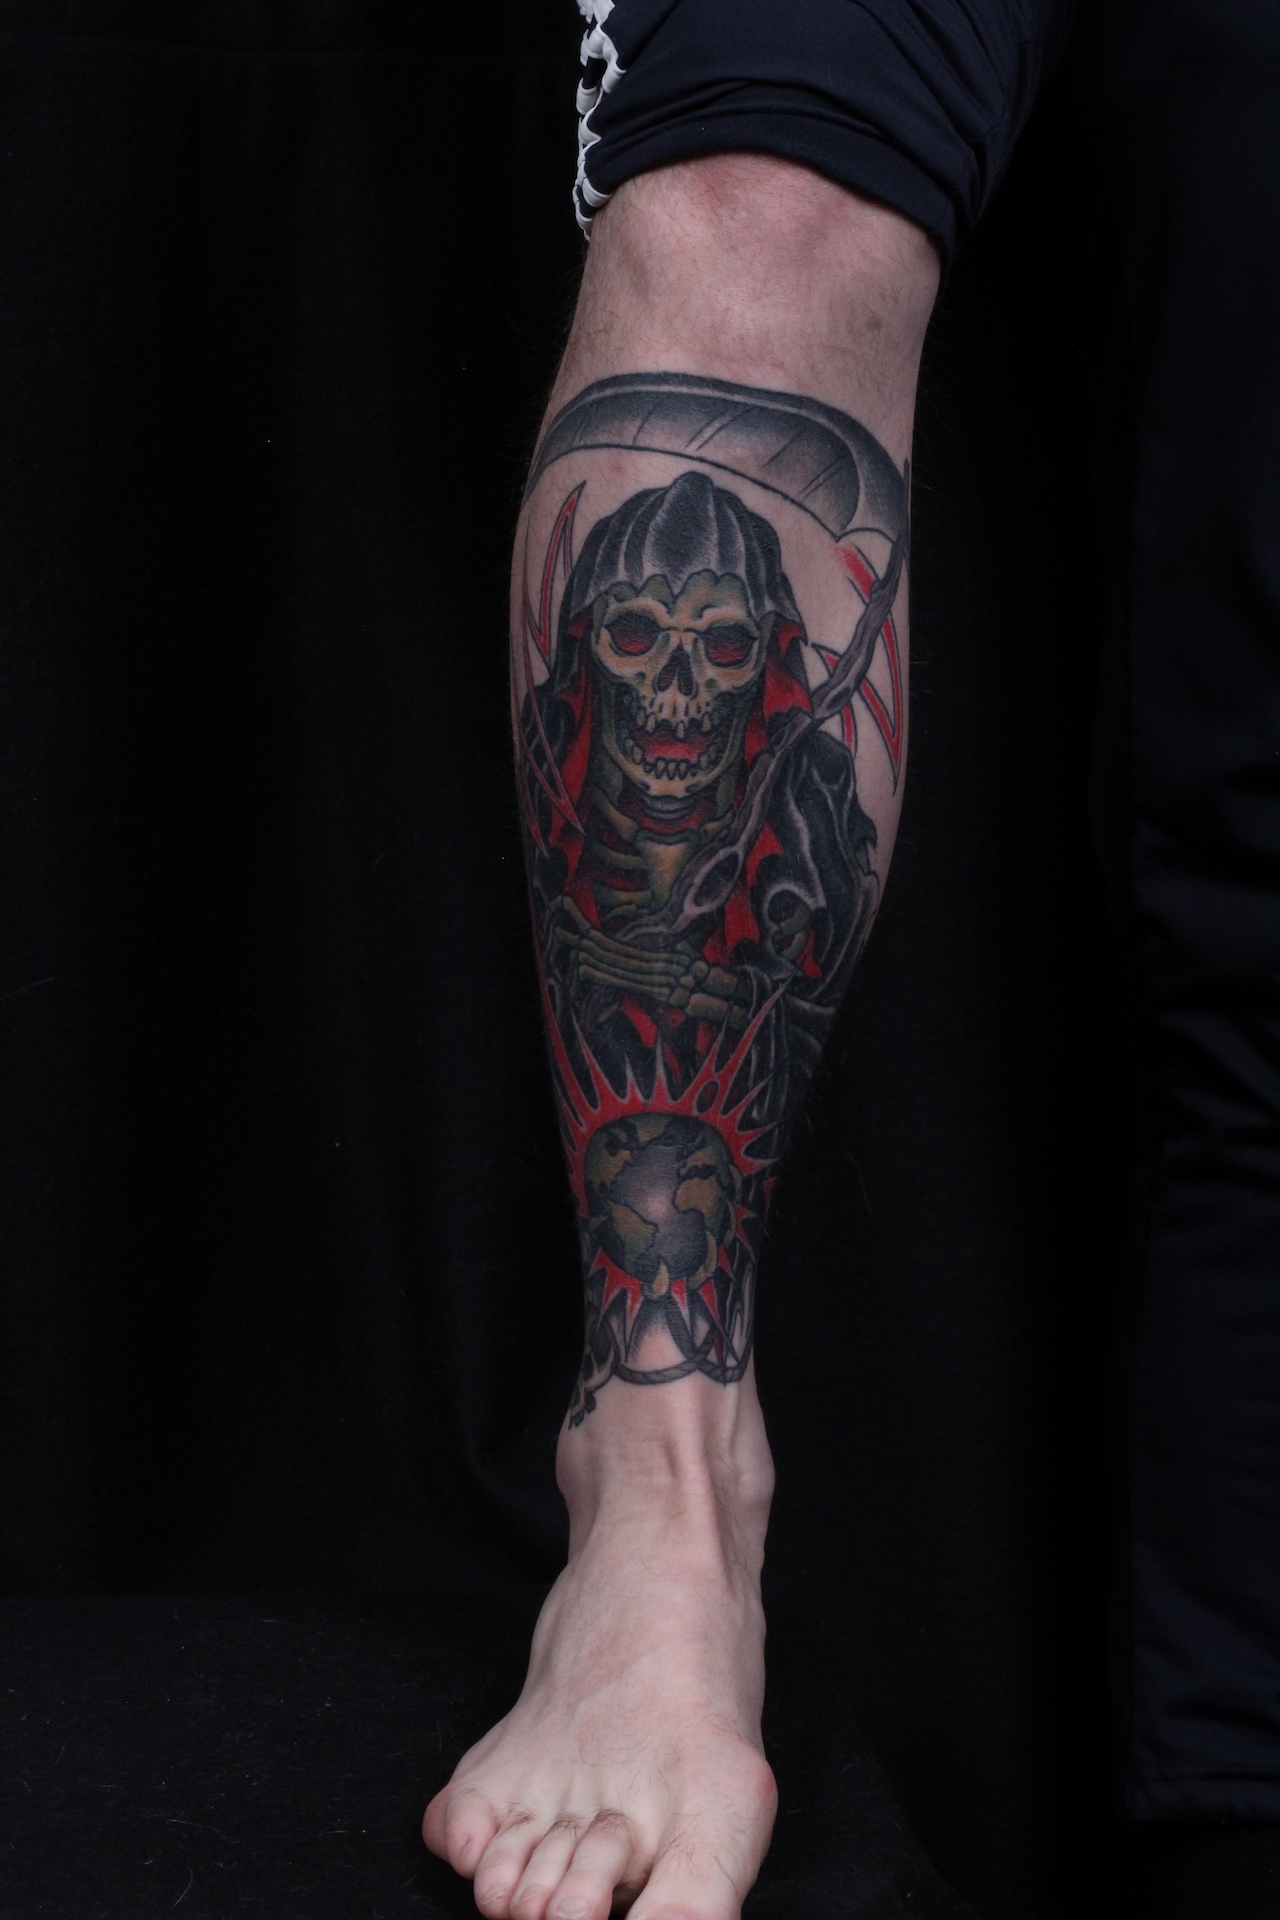 Reaper tattooed in the American Traditional style. Made at Denver's finest Dedication Tattoo.